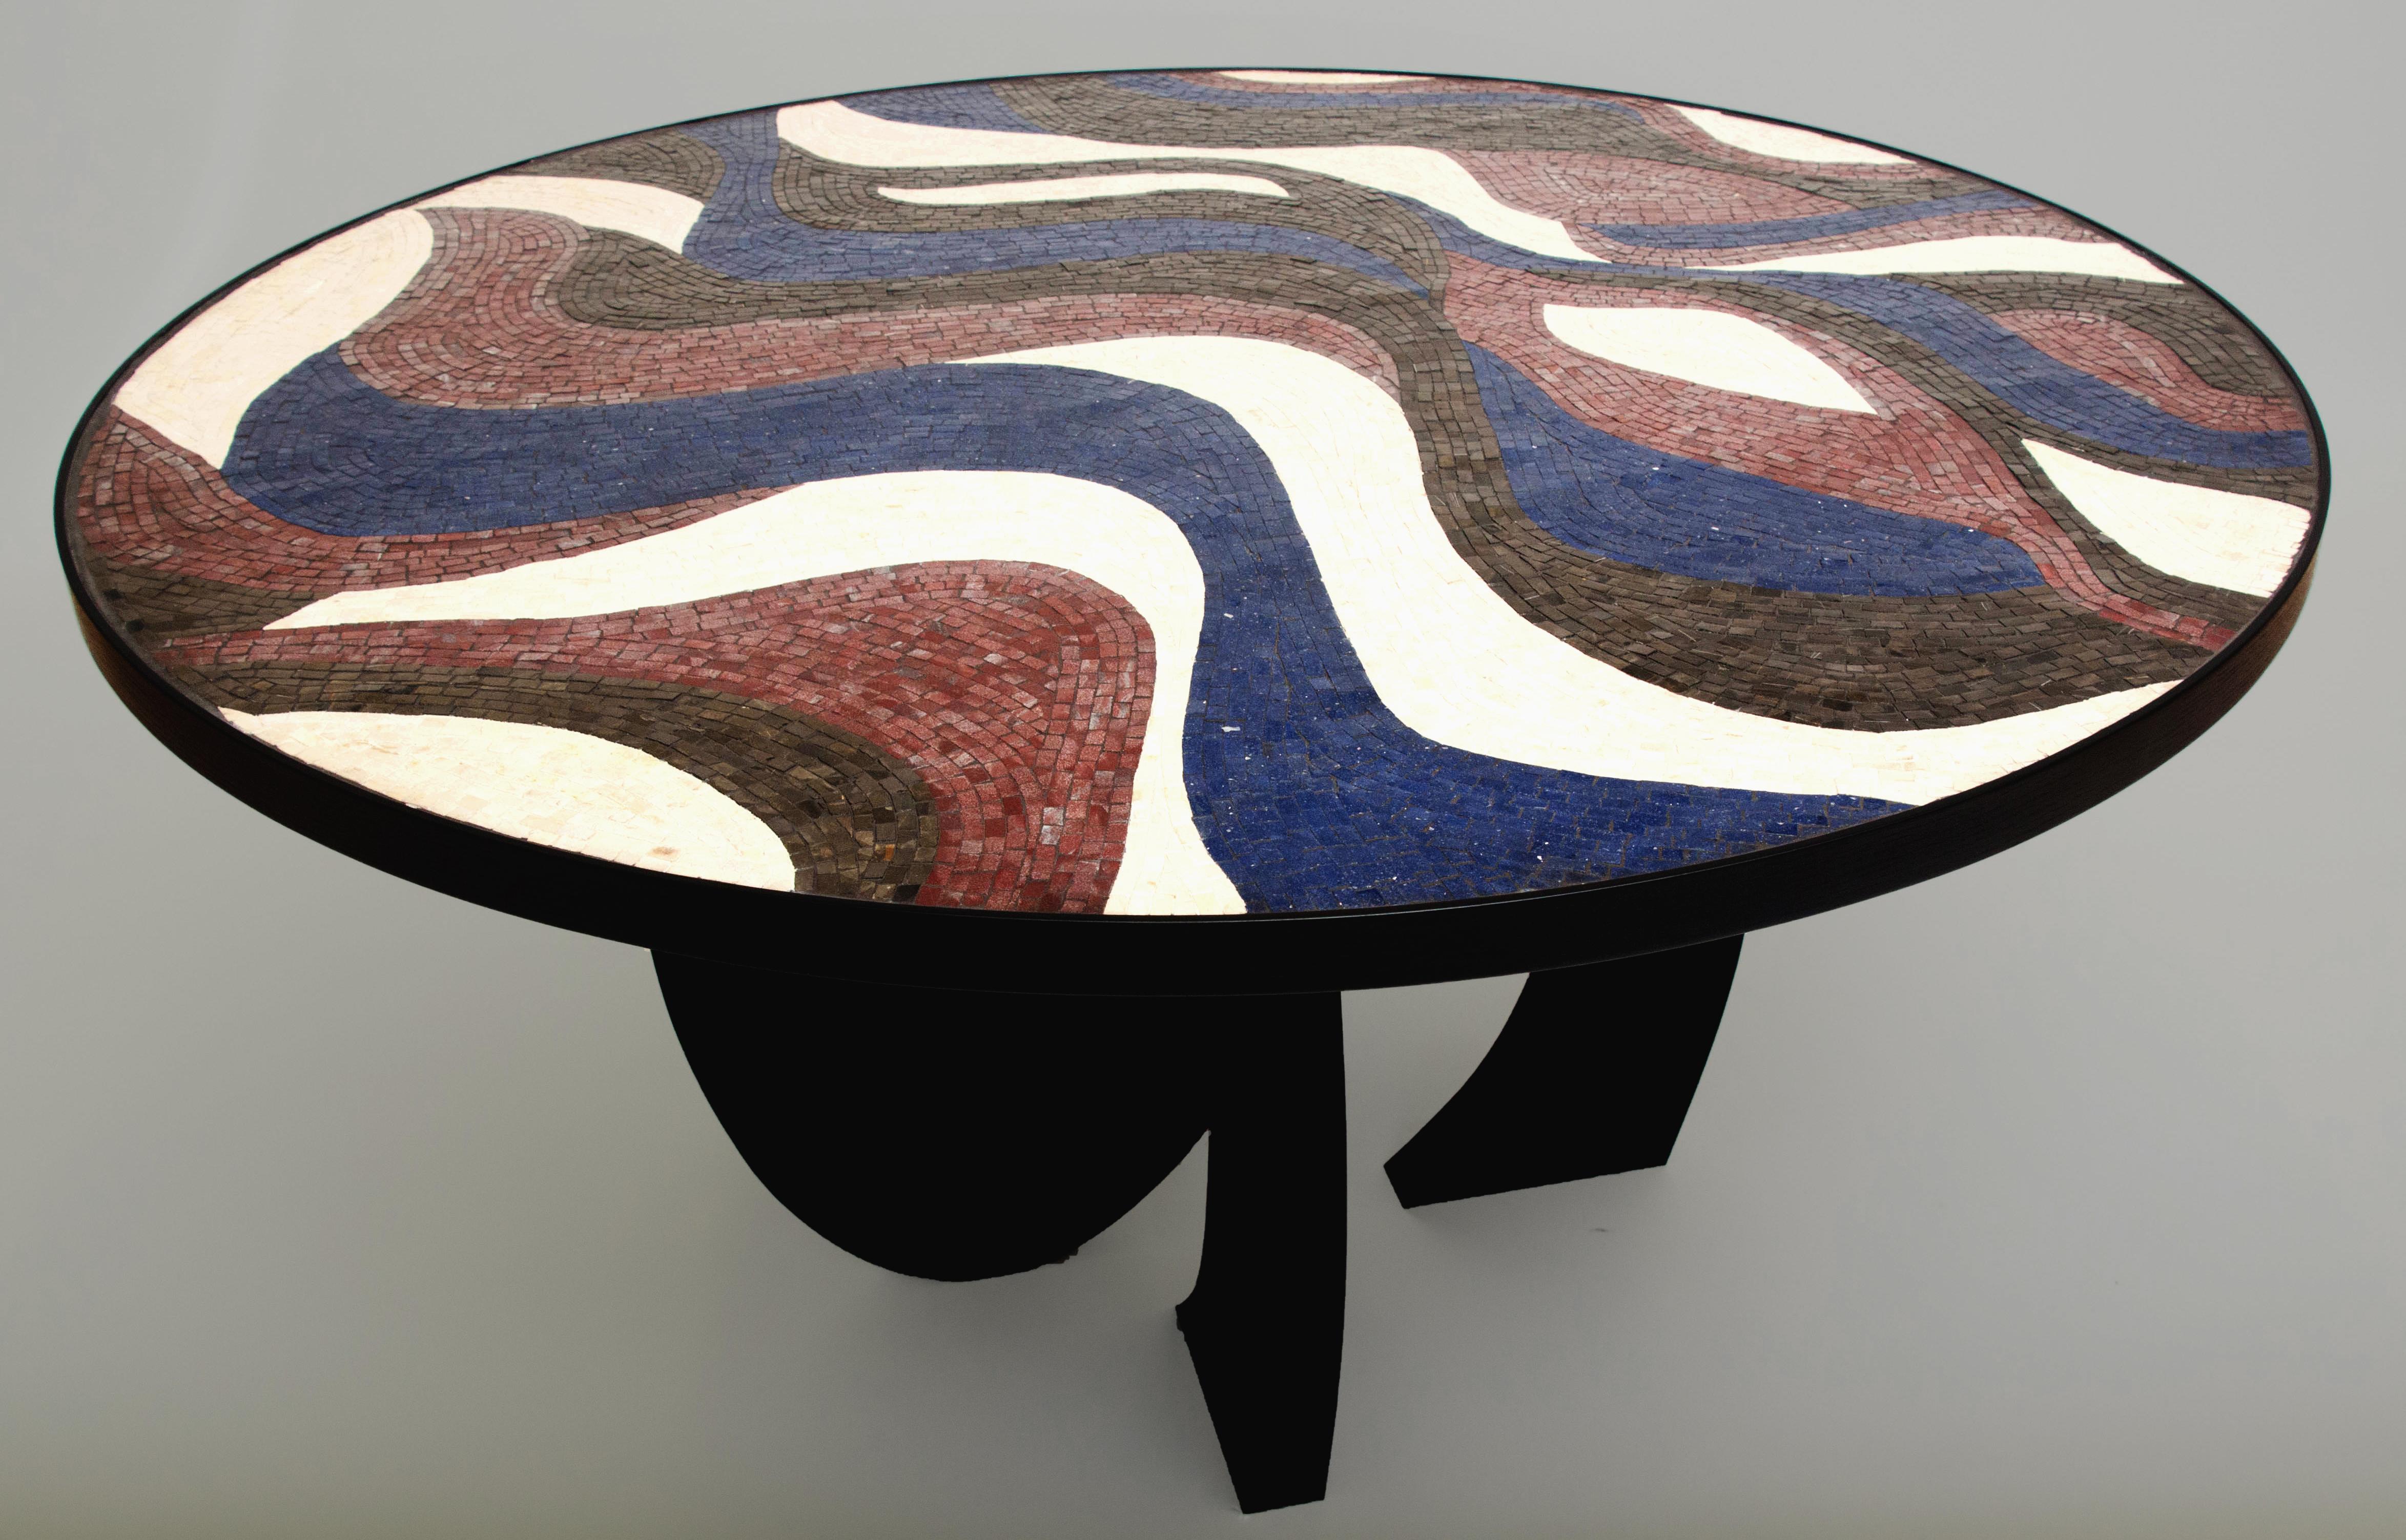 Stone Mosaic Dining or Center Hall Table